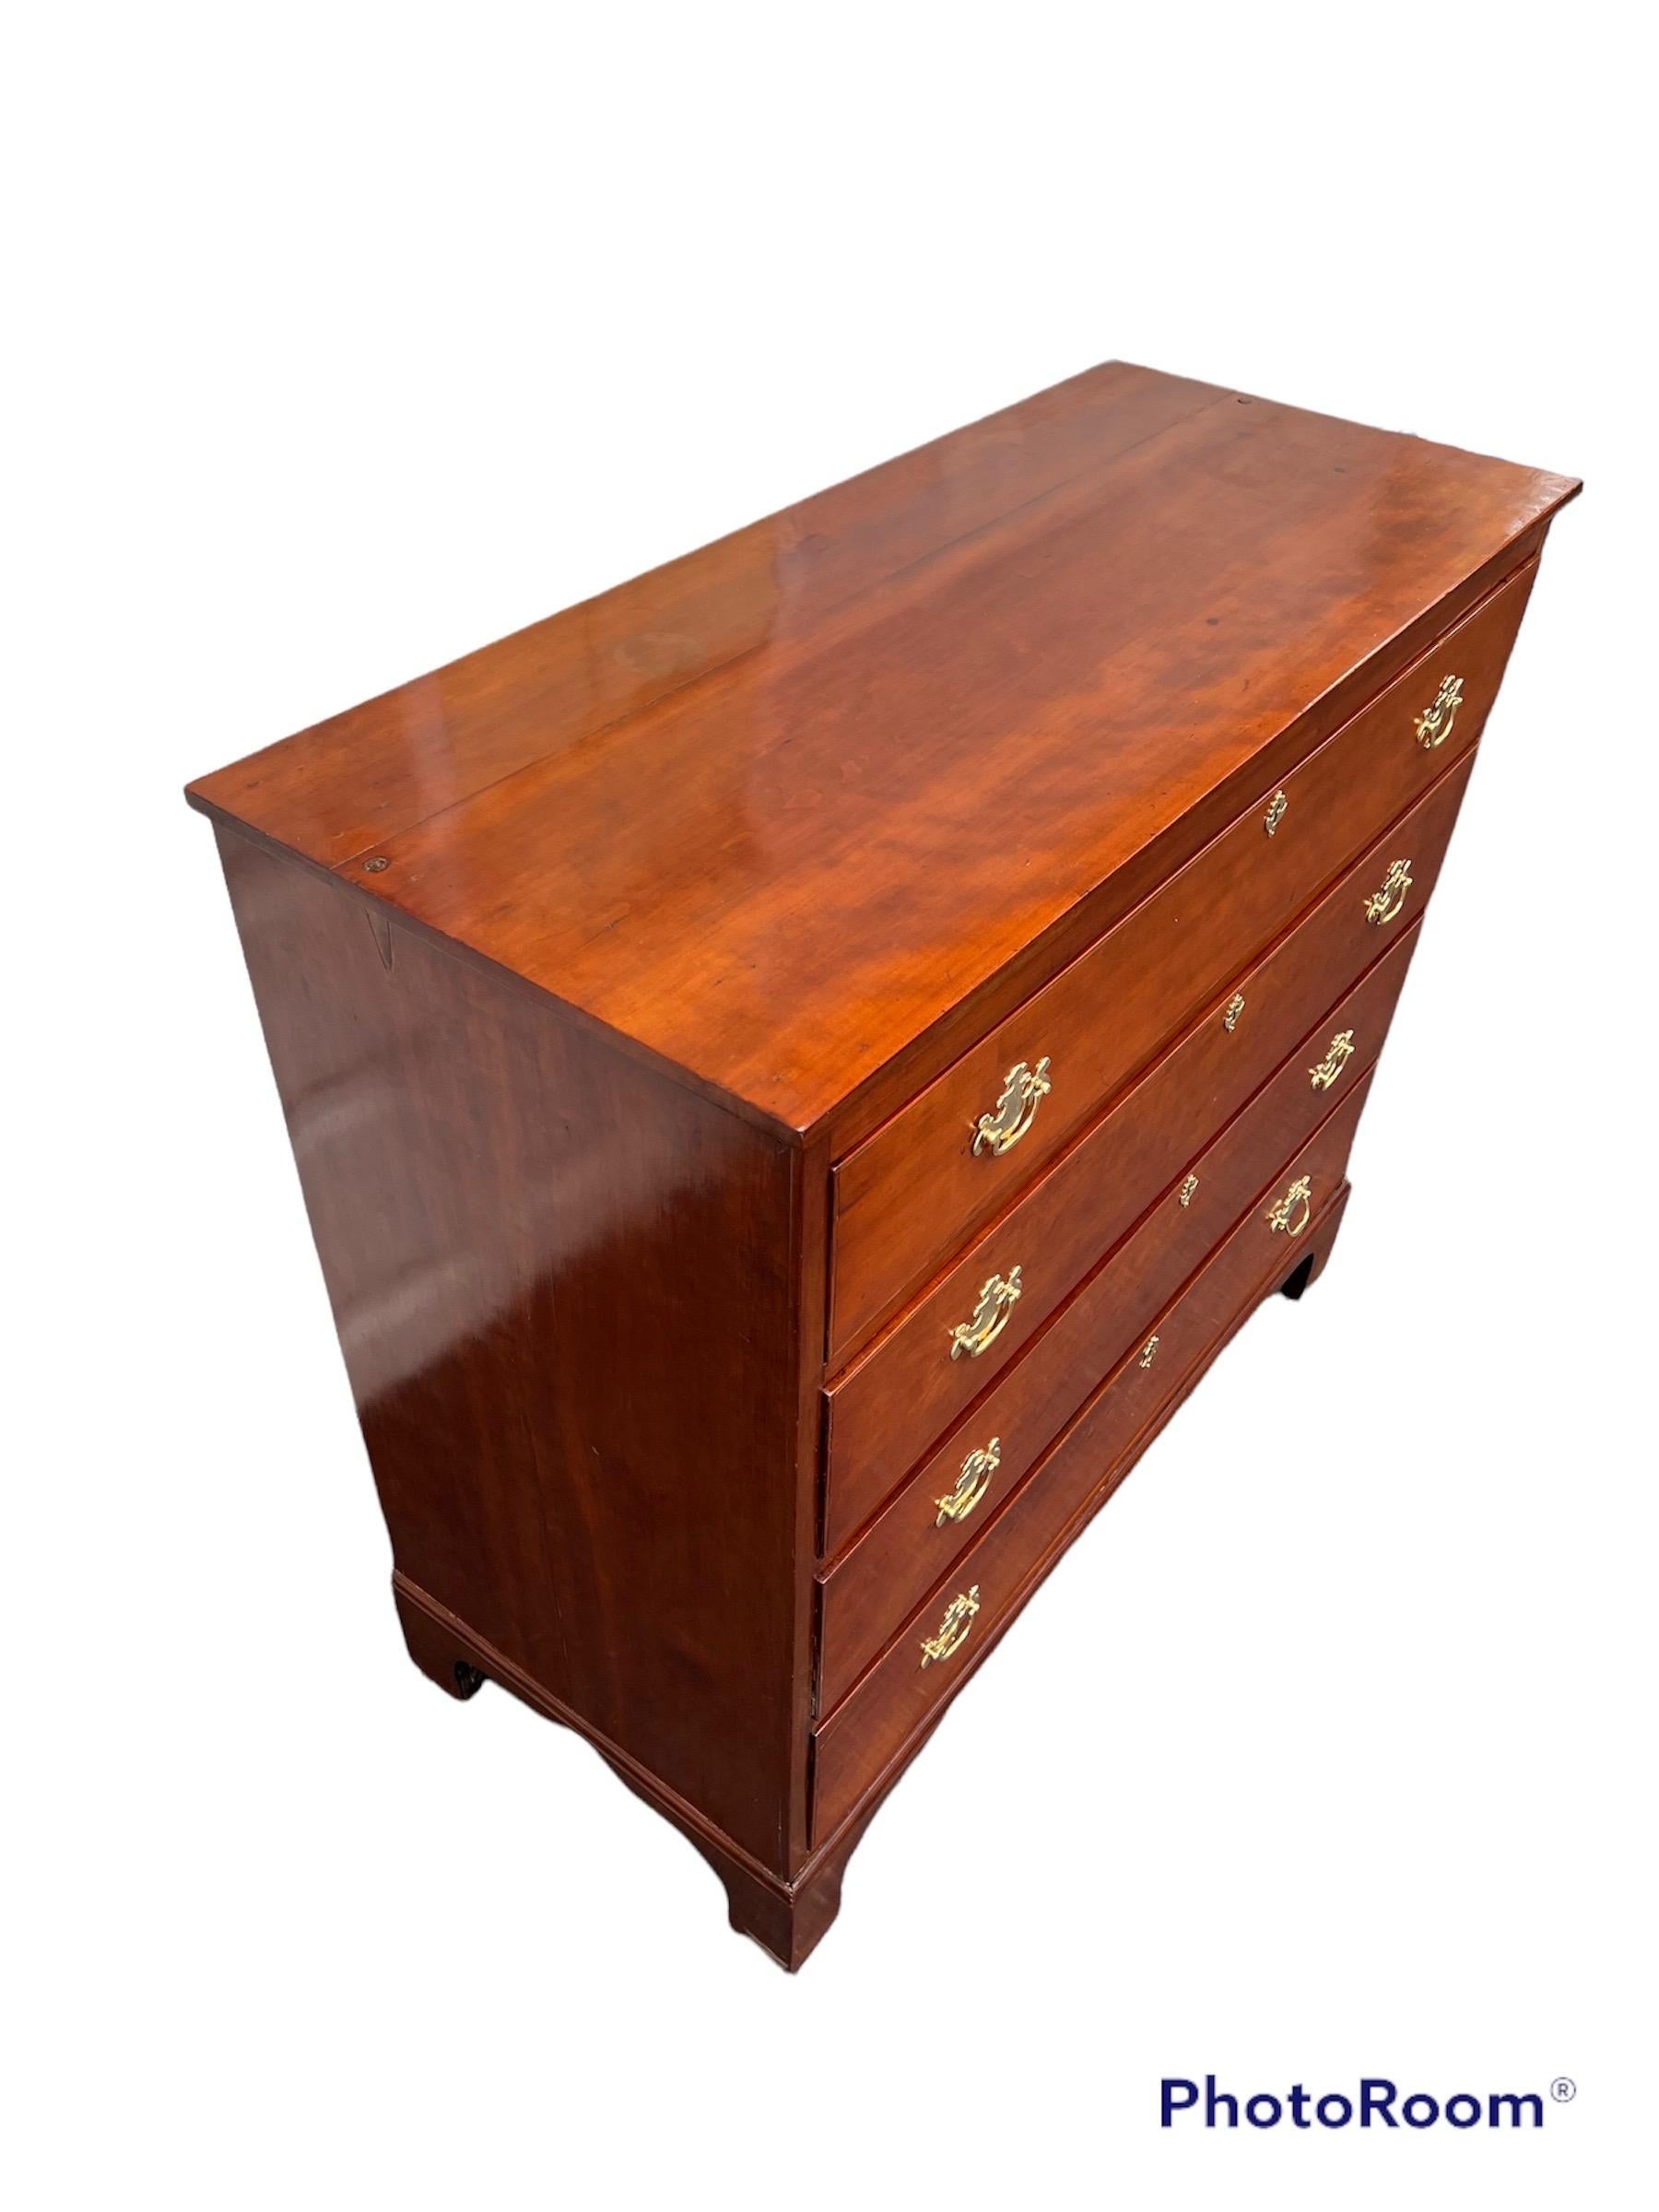 American cherry wood chest of drawers with graduated drawers,
brass handles & keyhole escutcheons.
 